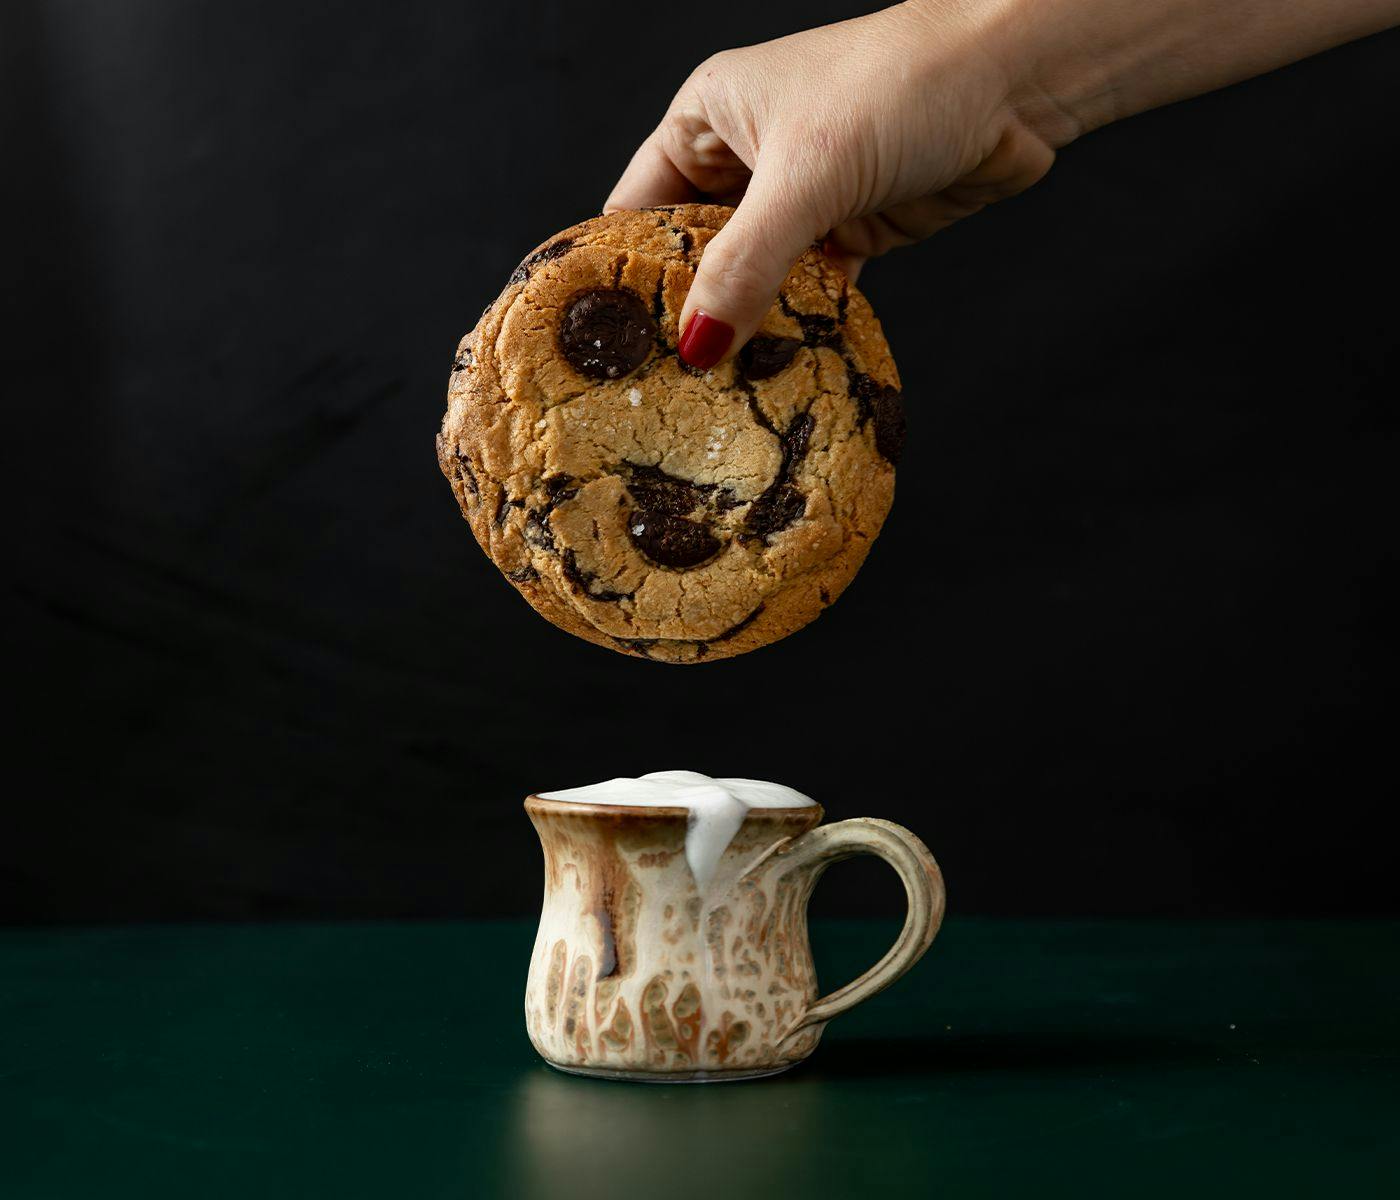 A rustic cup filled with frothy milk, a huge cookie (too big to dunk) is held above it.